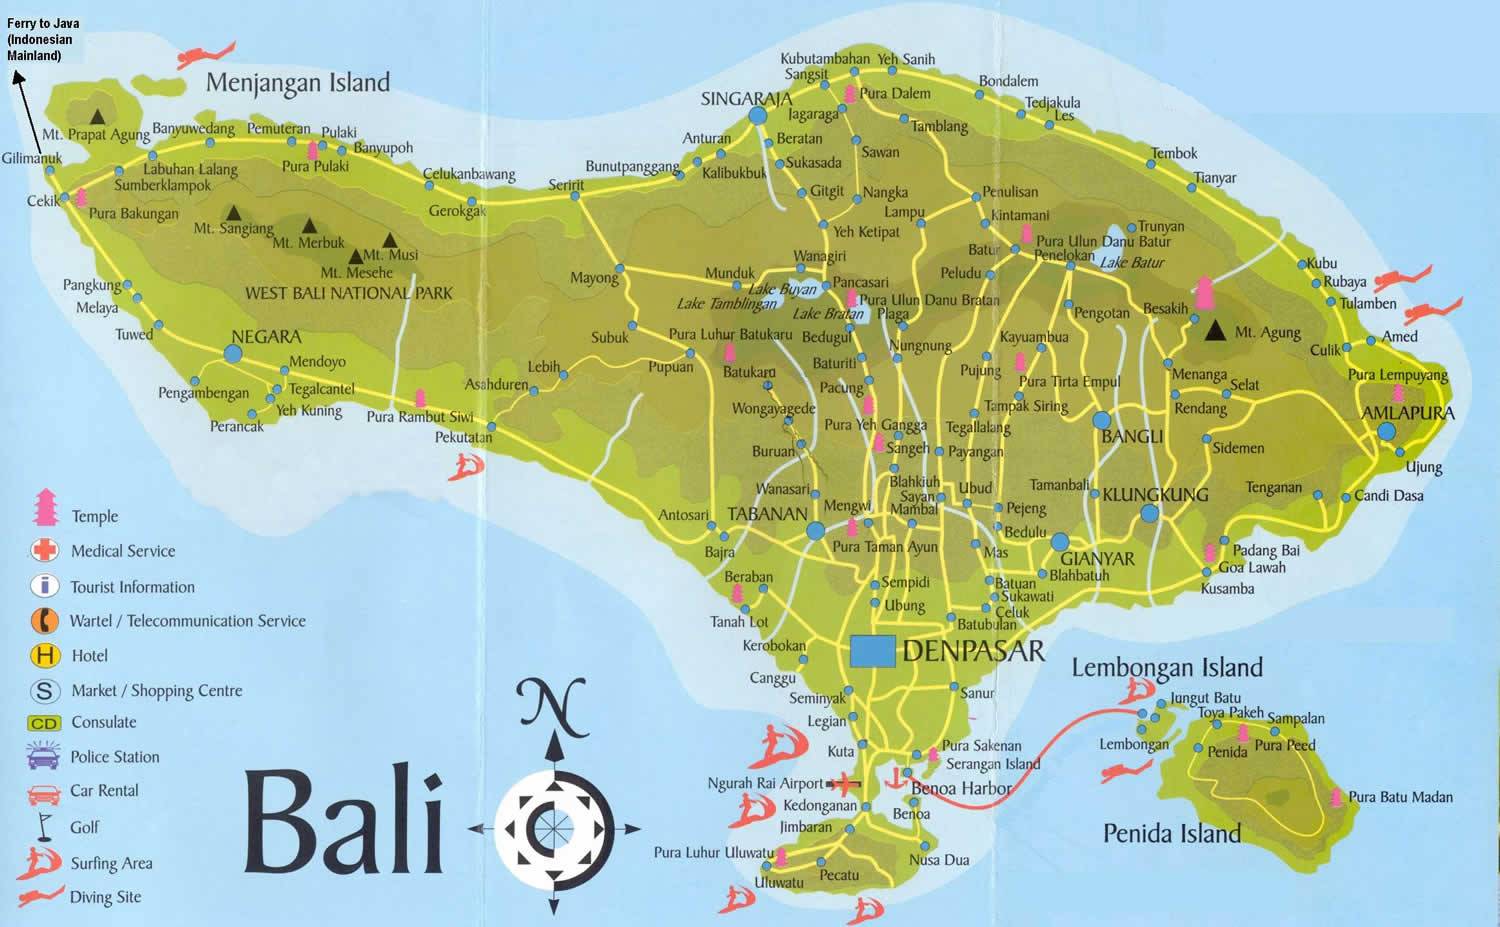 Is Tourism In Bali Map Indonesia Has Really Dropped Down A Cliff?